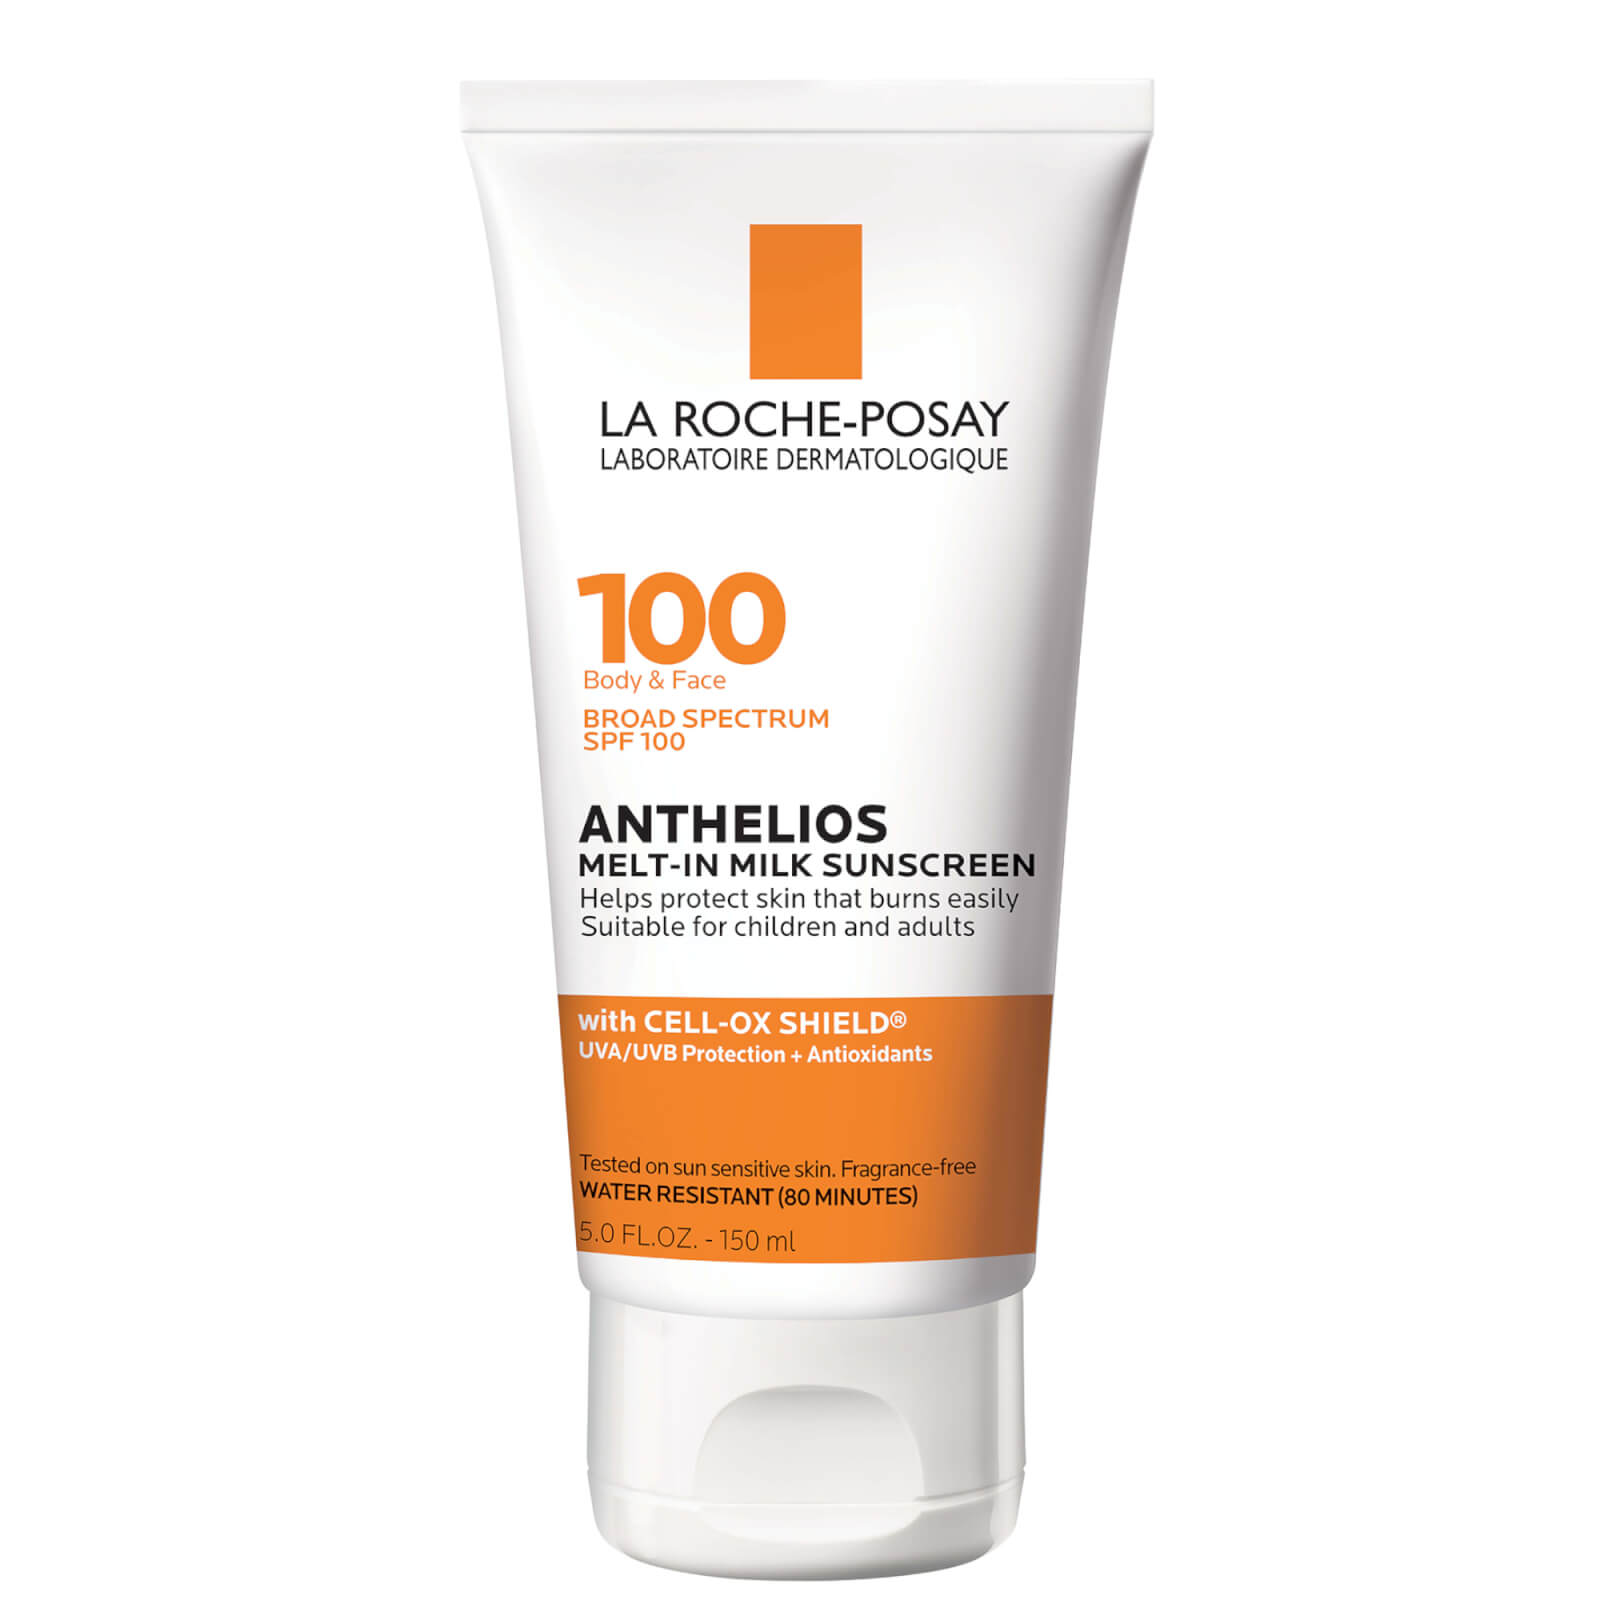 La Roche-posay Anthelios Melt-in Milk Body Face Sunscreen Lotion Broad Spectrum Spf 100 (various Sizes) In White